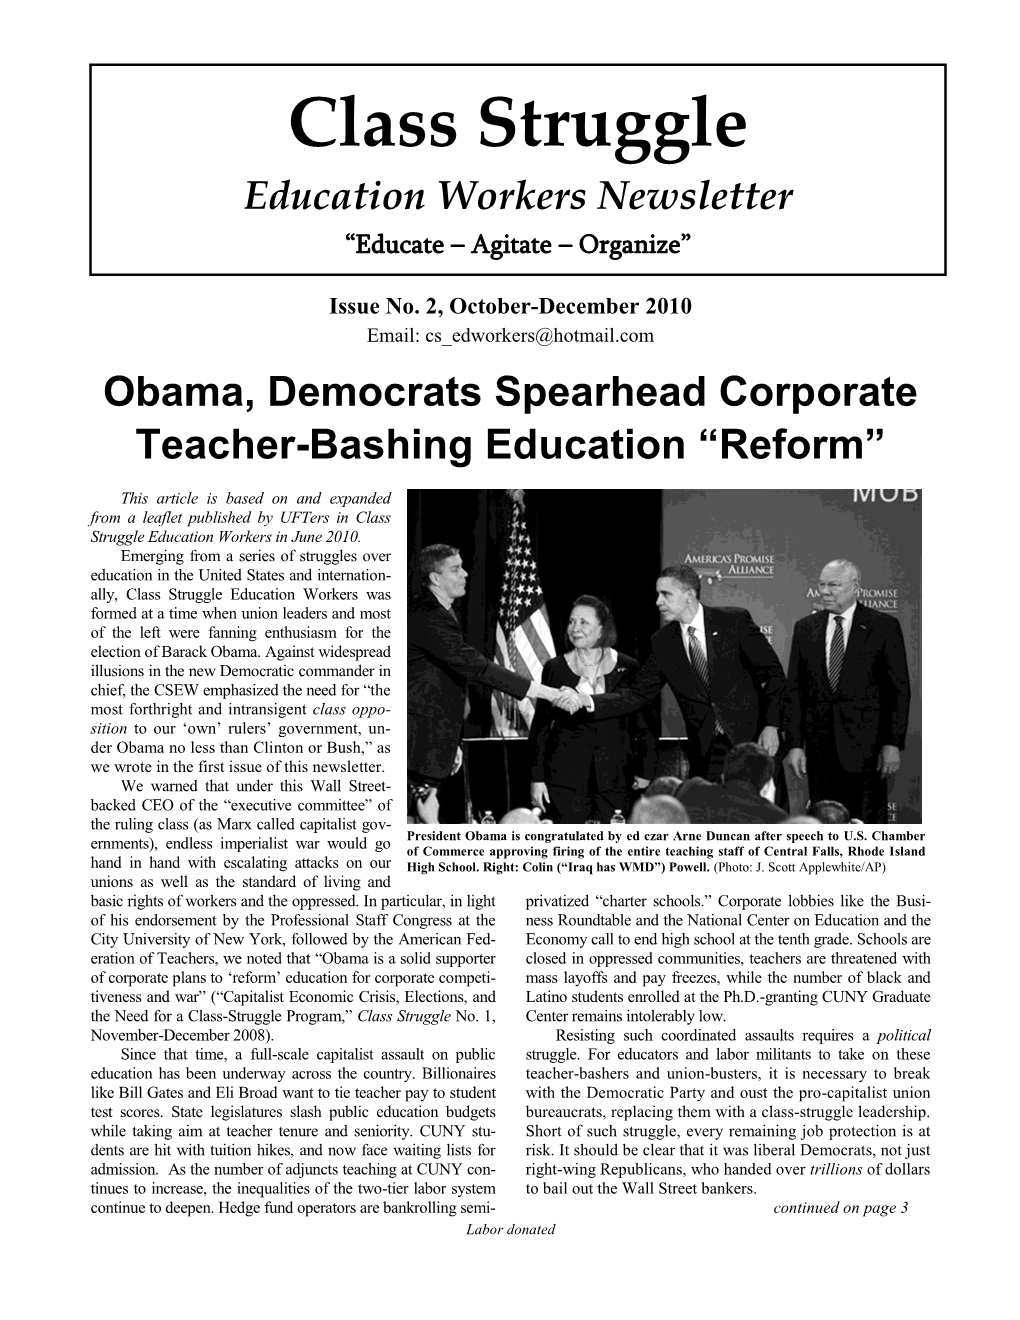 Class Struggle Education Workers Newsletter